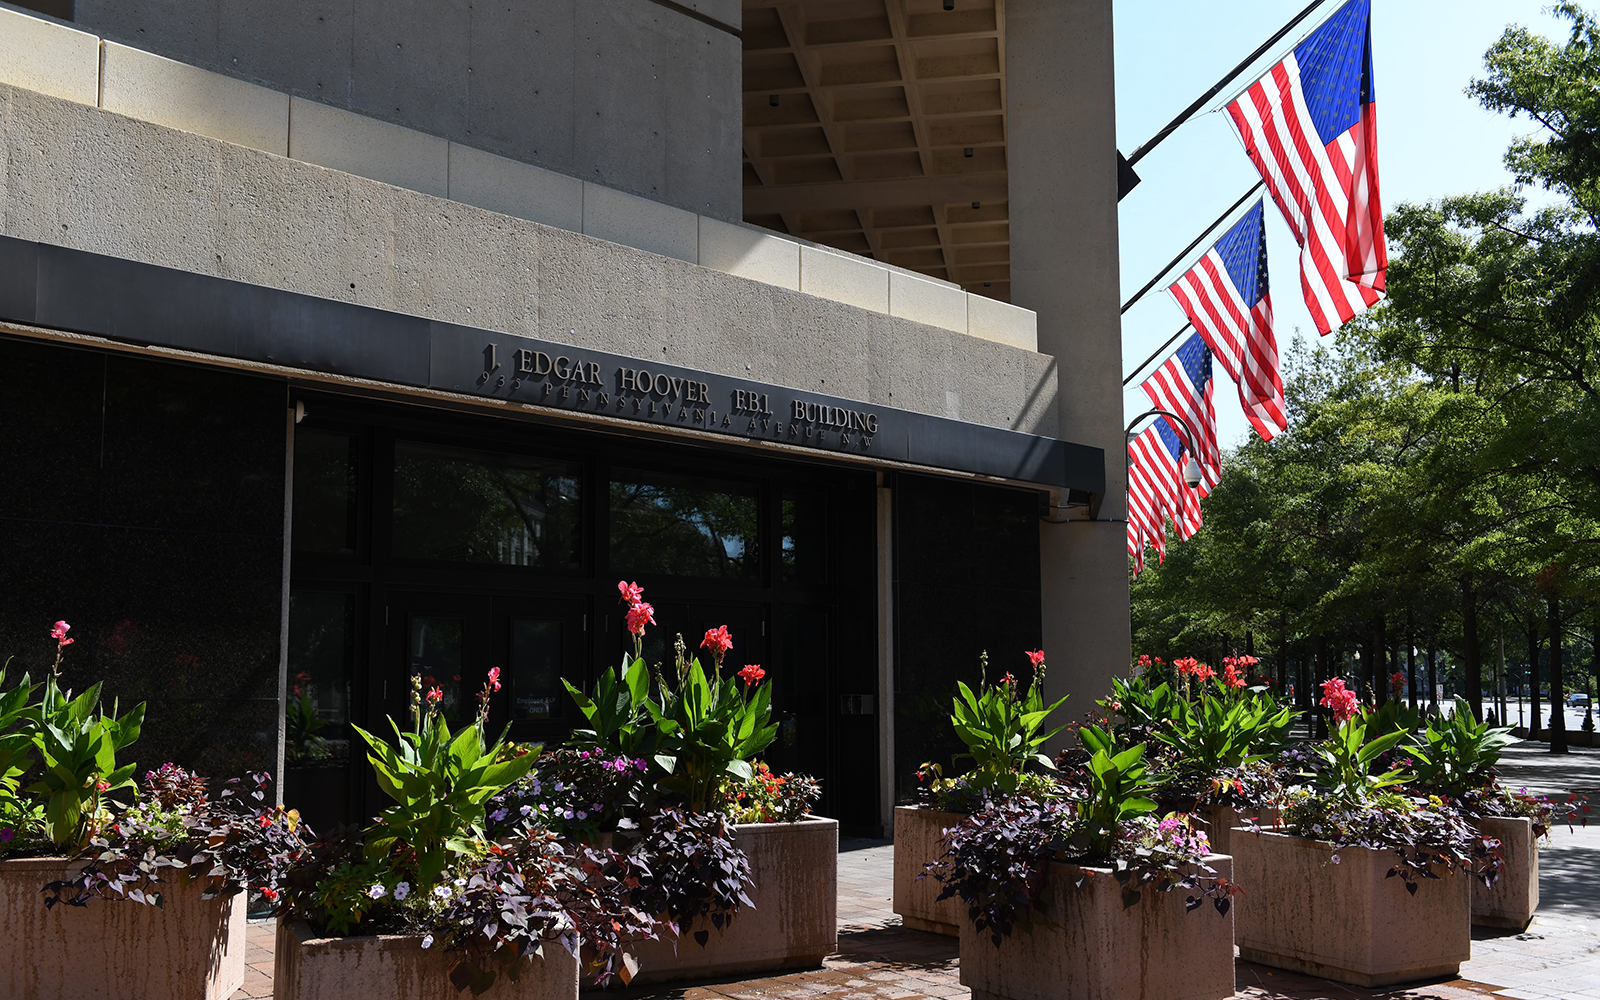 photo of FBI building front with several American flags and planters